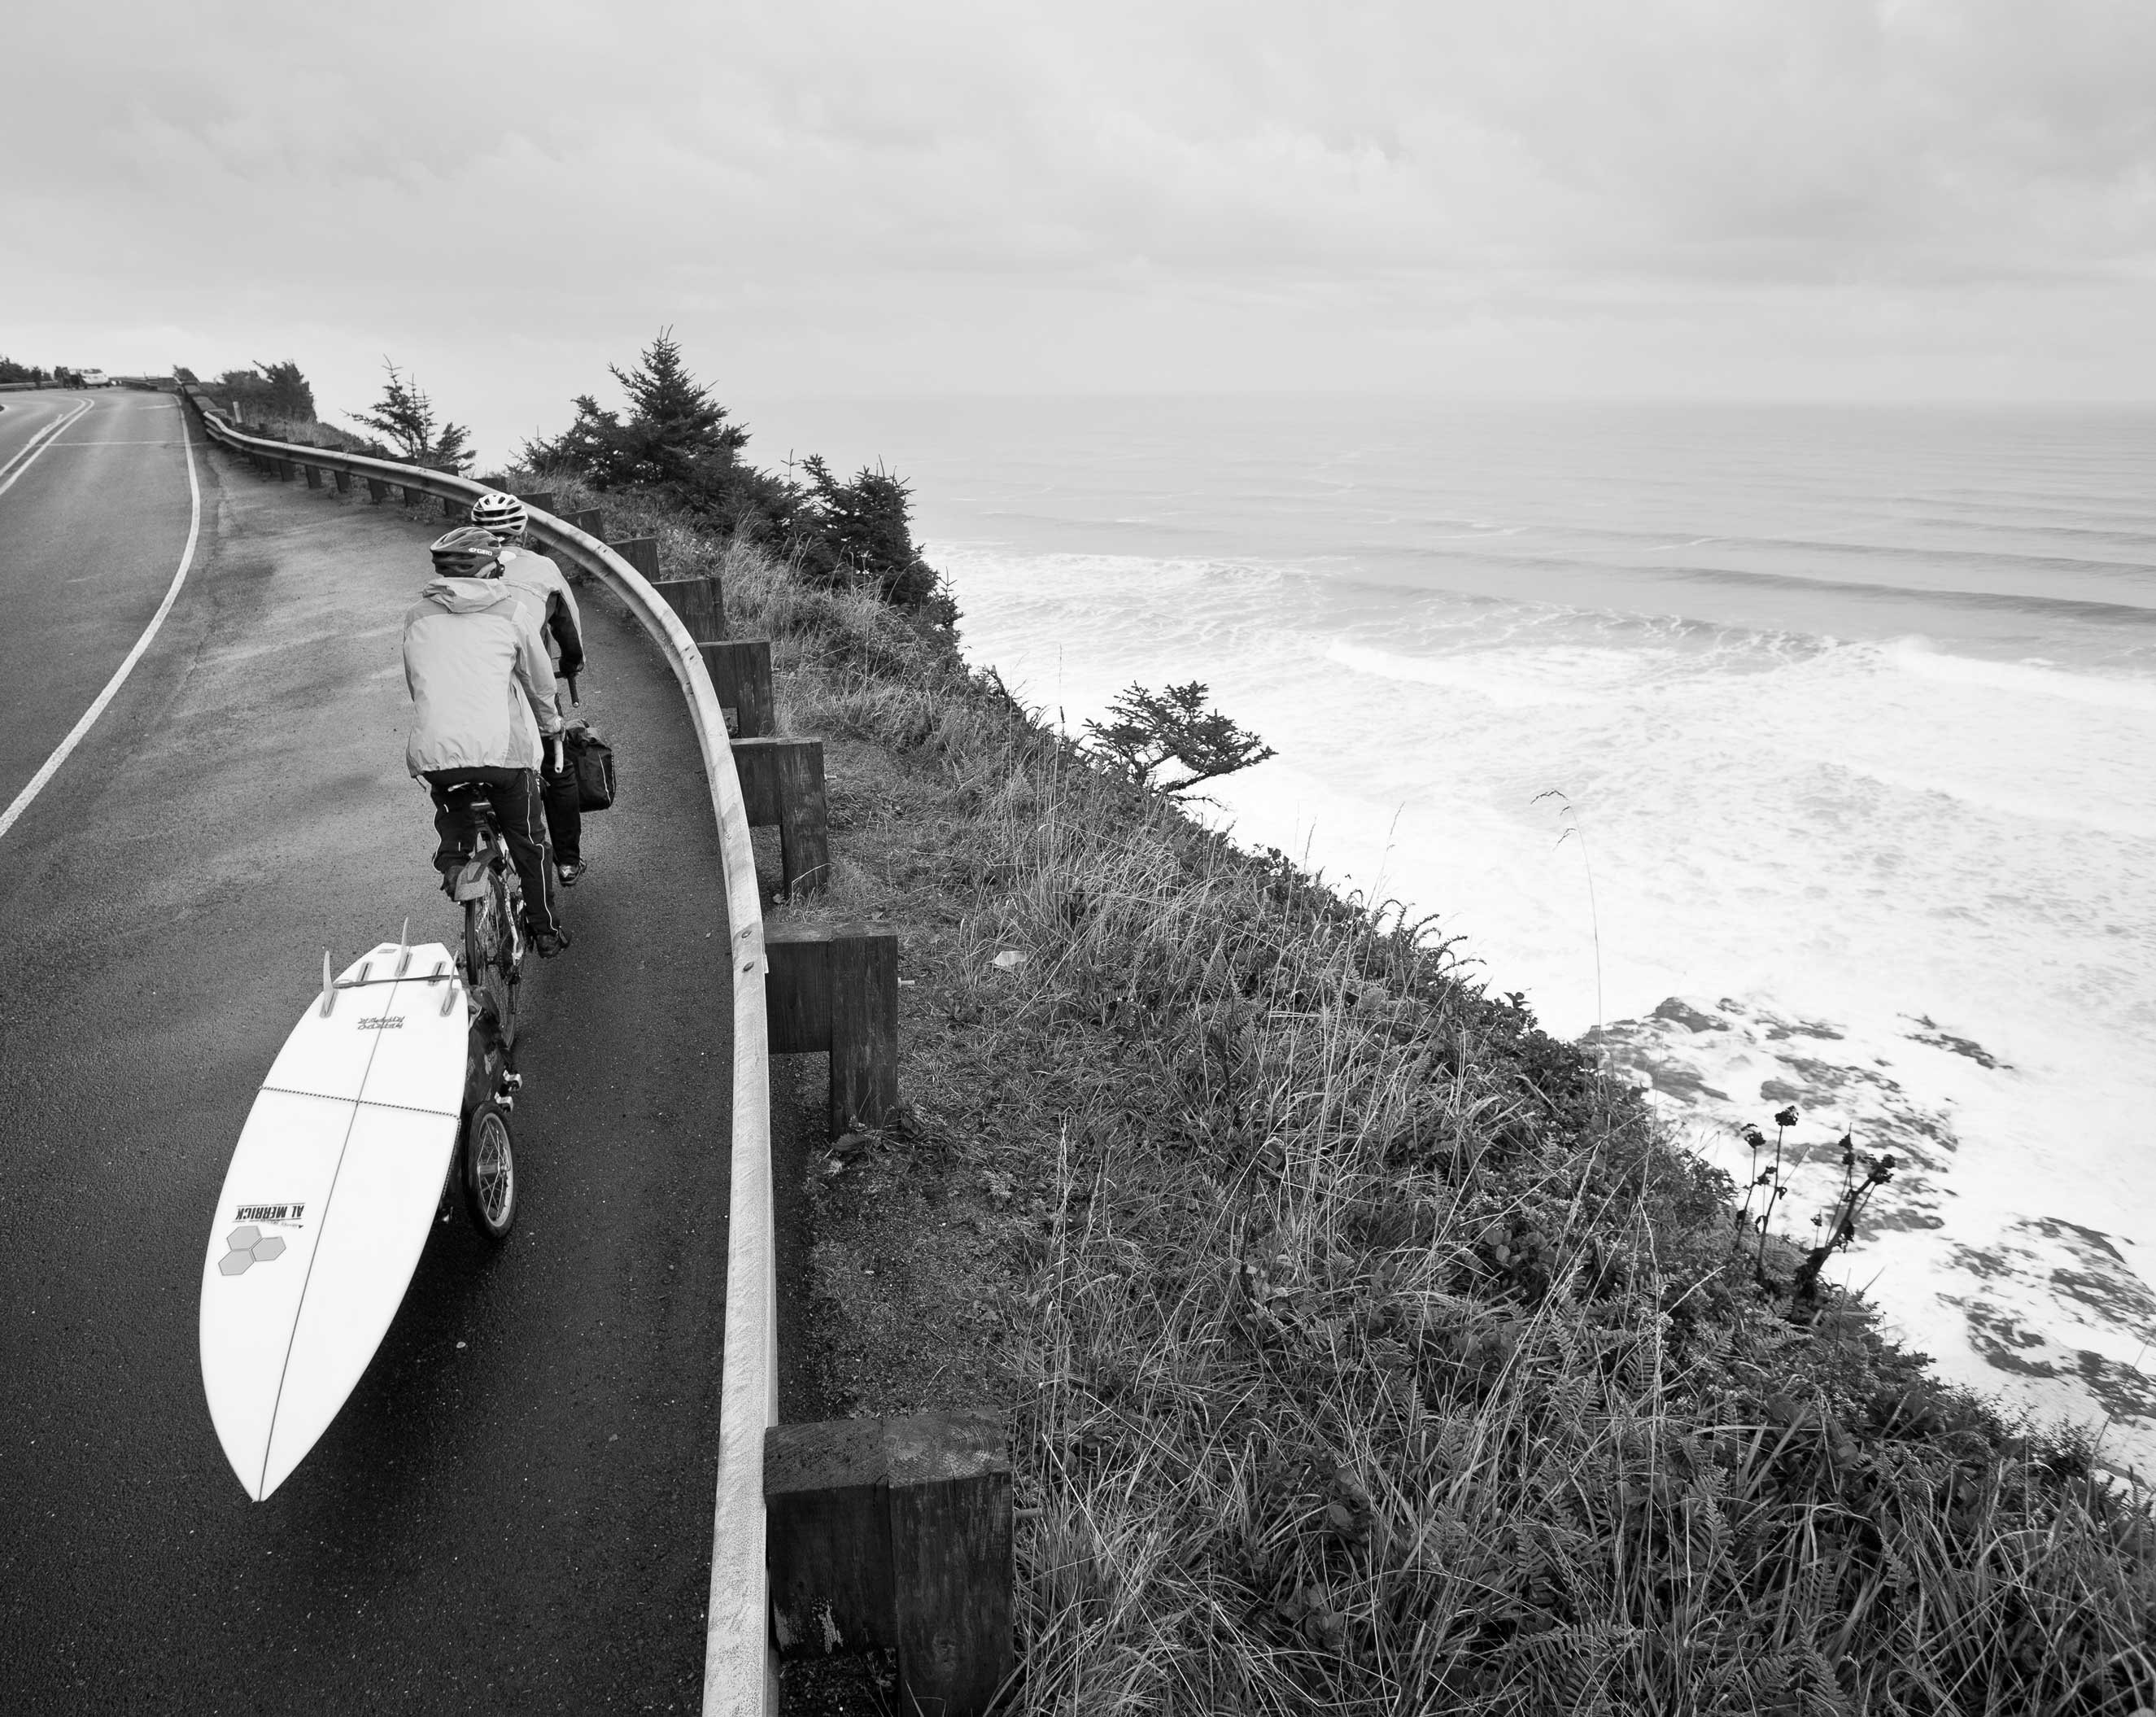 Two bicyclists cycle along the road with helmets and jackets on, towing a long a surfboard. Site of the ocean off to the right.